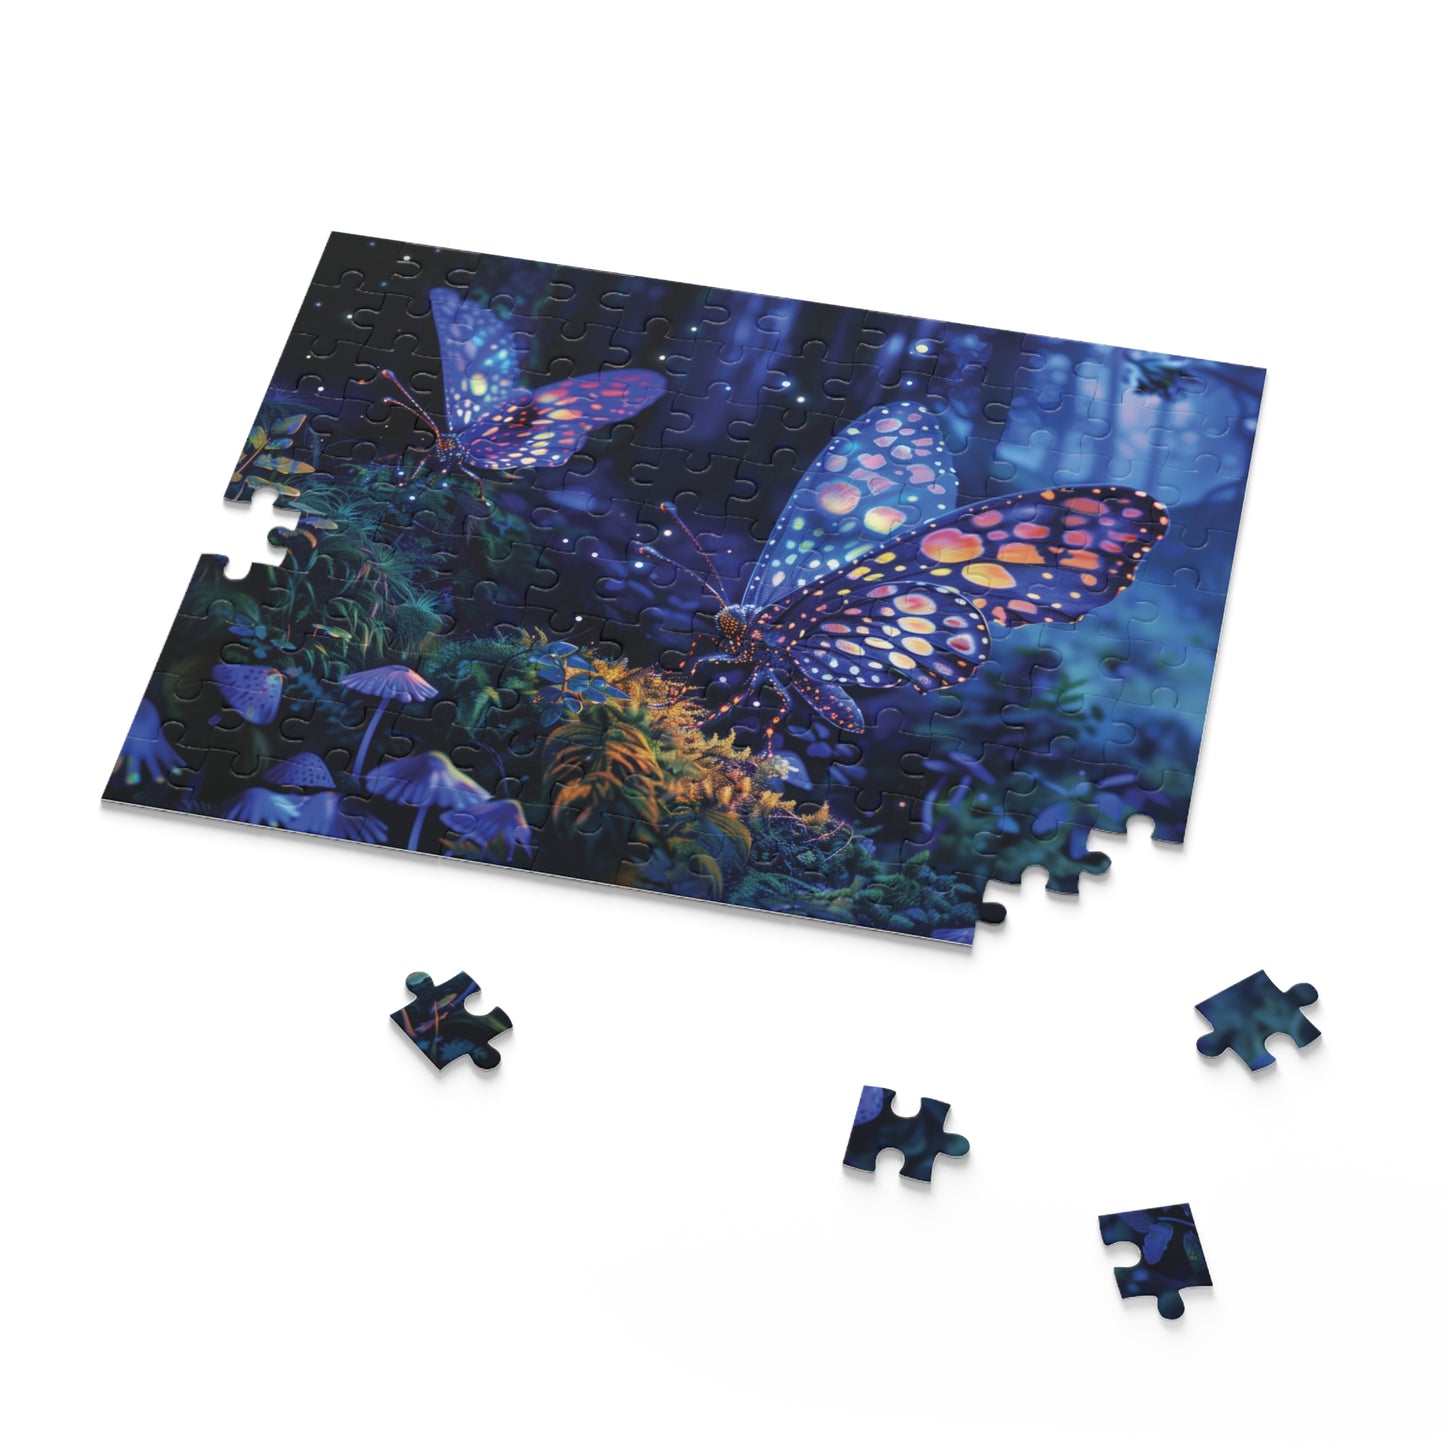 Butterfly Puzzle, Moth Jigsaw Puzzle, Beautiful Painting Puzzle, Artistic Puzzle, 120 pieces, 252 pieces, 500 pieces, Family Game